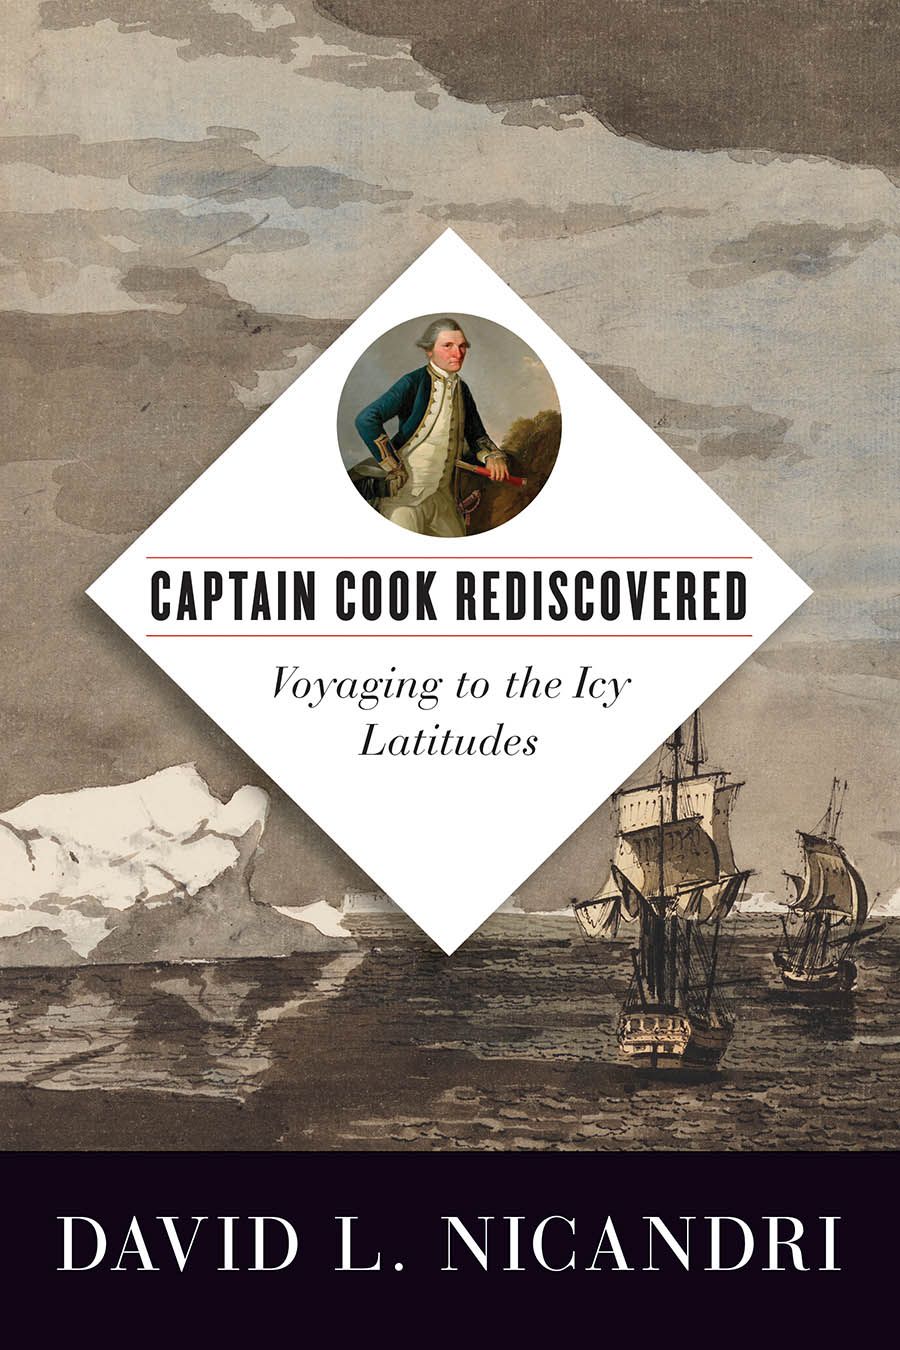 rediscovered captain cook david